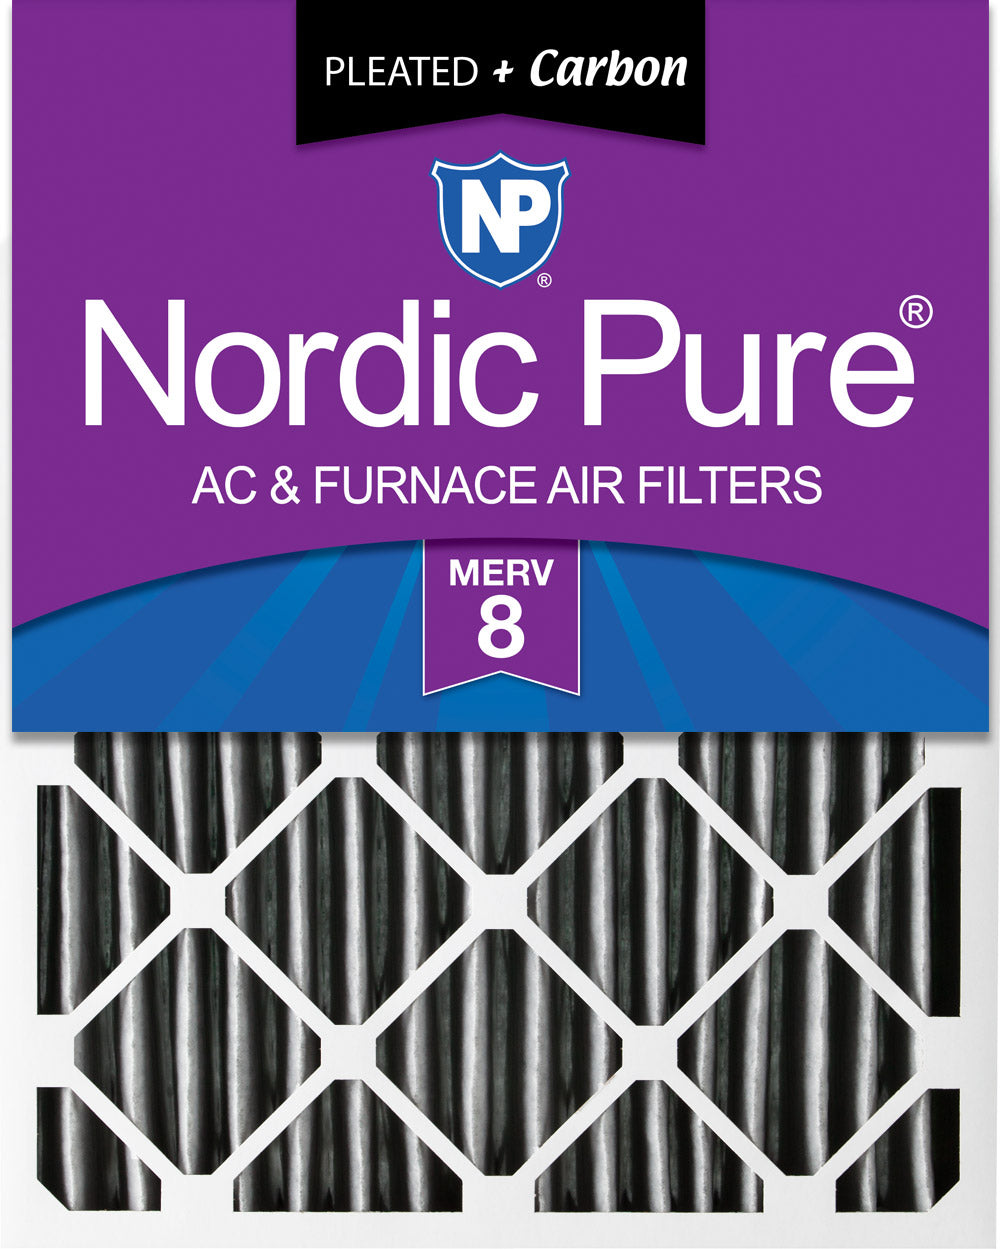 20x20x4 (3 5/8) Furnace Air Filters MERV 8 Pleated Plus Carbon